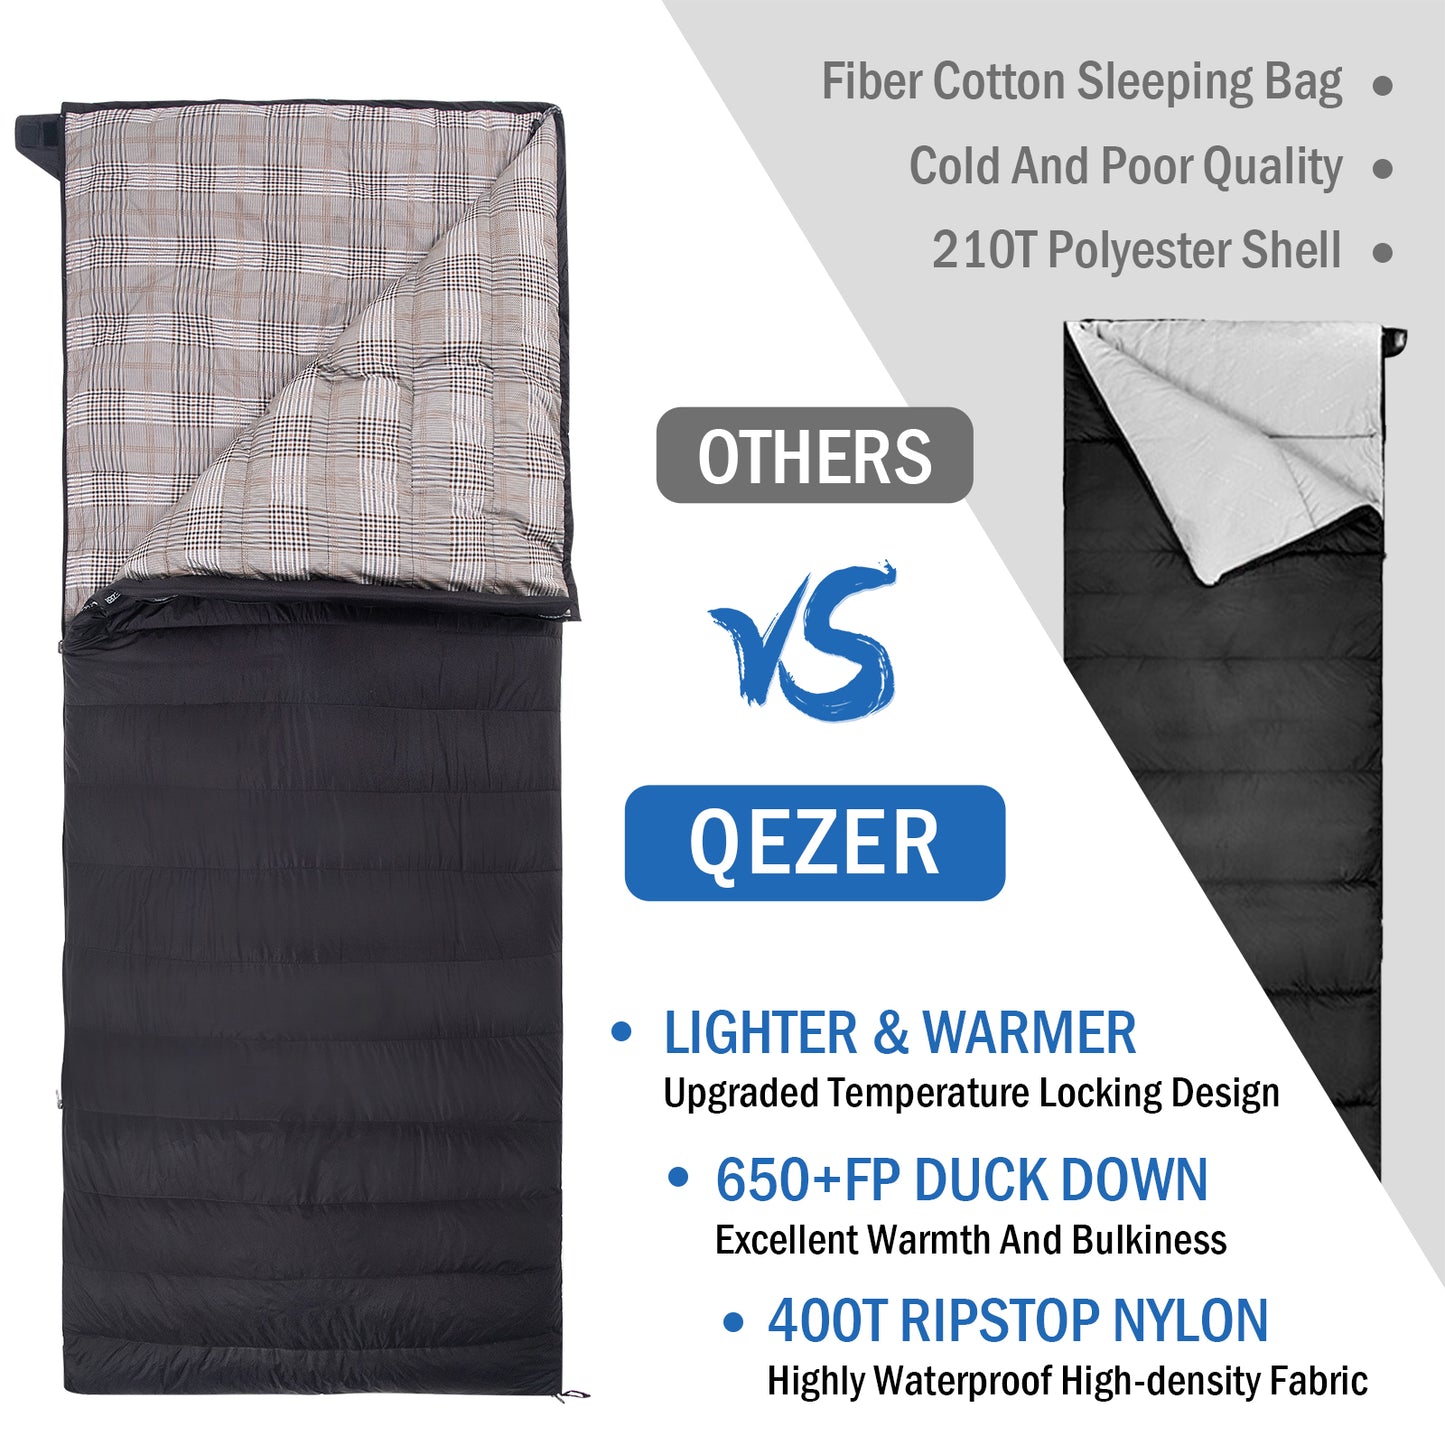 QEZER Down Sleeping Bag for Adults, Lightweight Warmer Rectangular Sleeping Bag for  Cold Weather Camping and montaineering Outdoor, can be used as the blanket